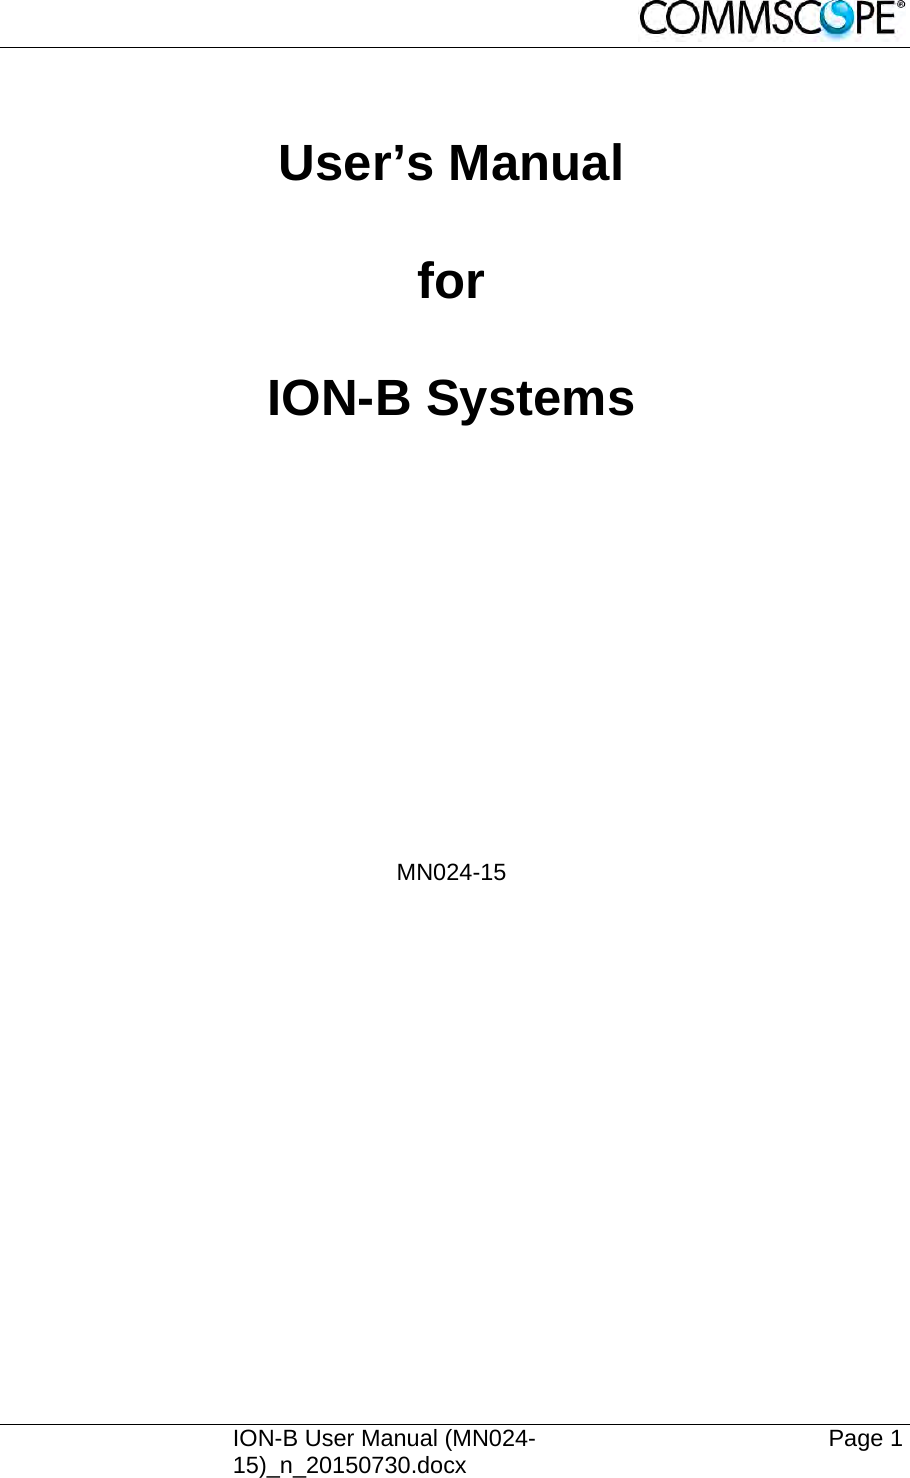     ION-B User Manual (MN024-15)_n_20150730.docx  Page 1  User’s Manual  for  ION-B Systems                 MN024-15   